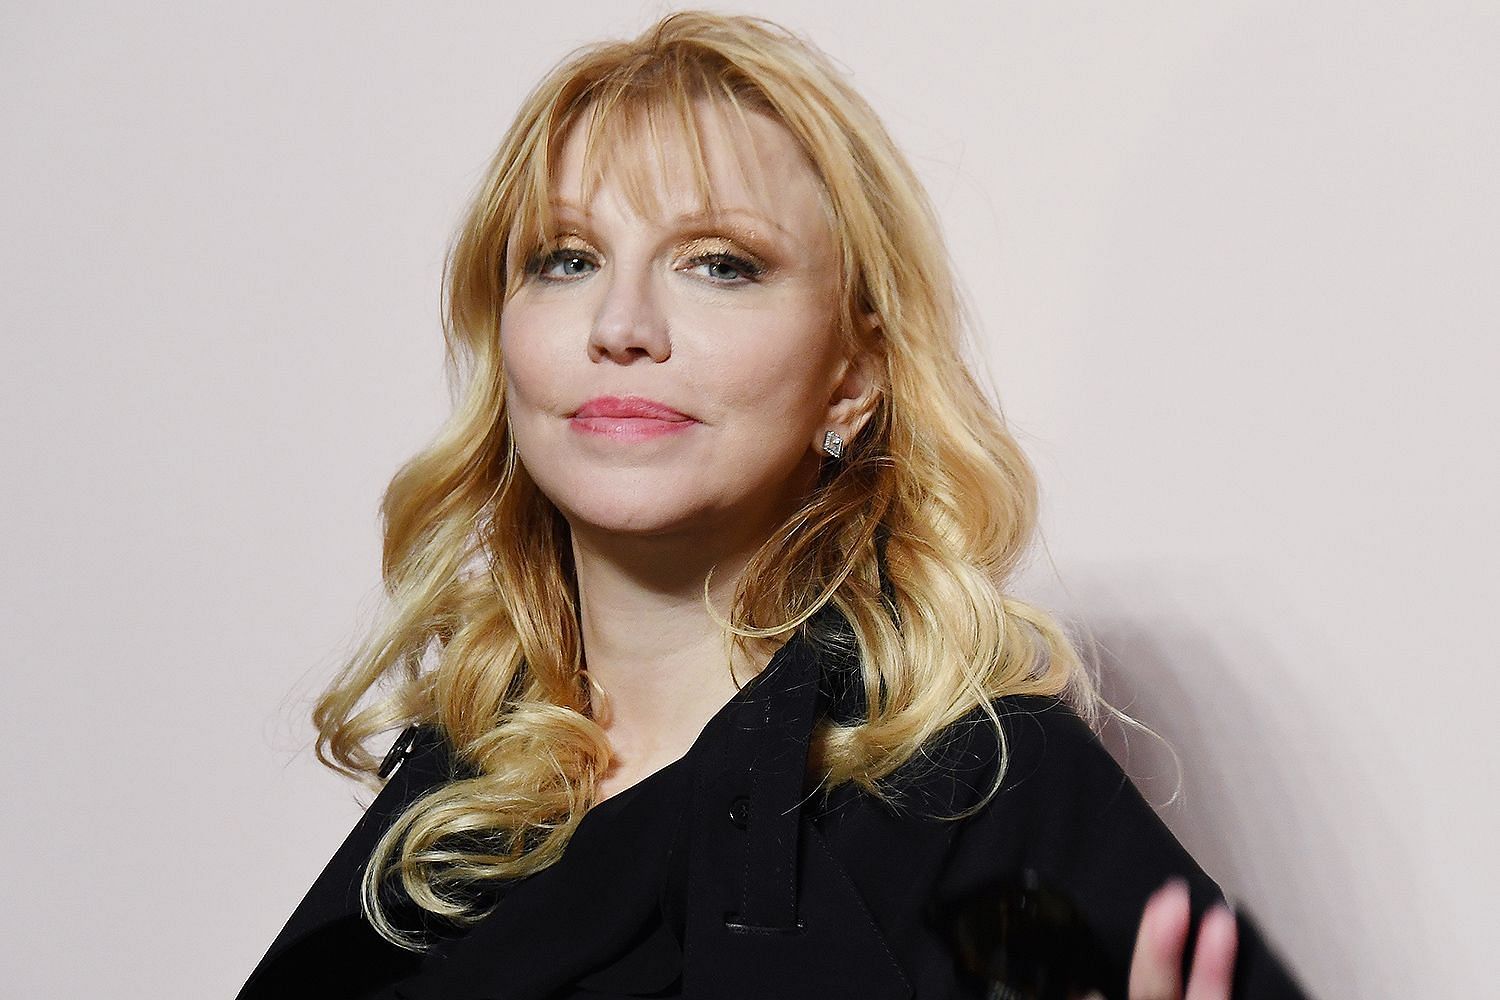 Courtney Love (Image via Getty Images)